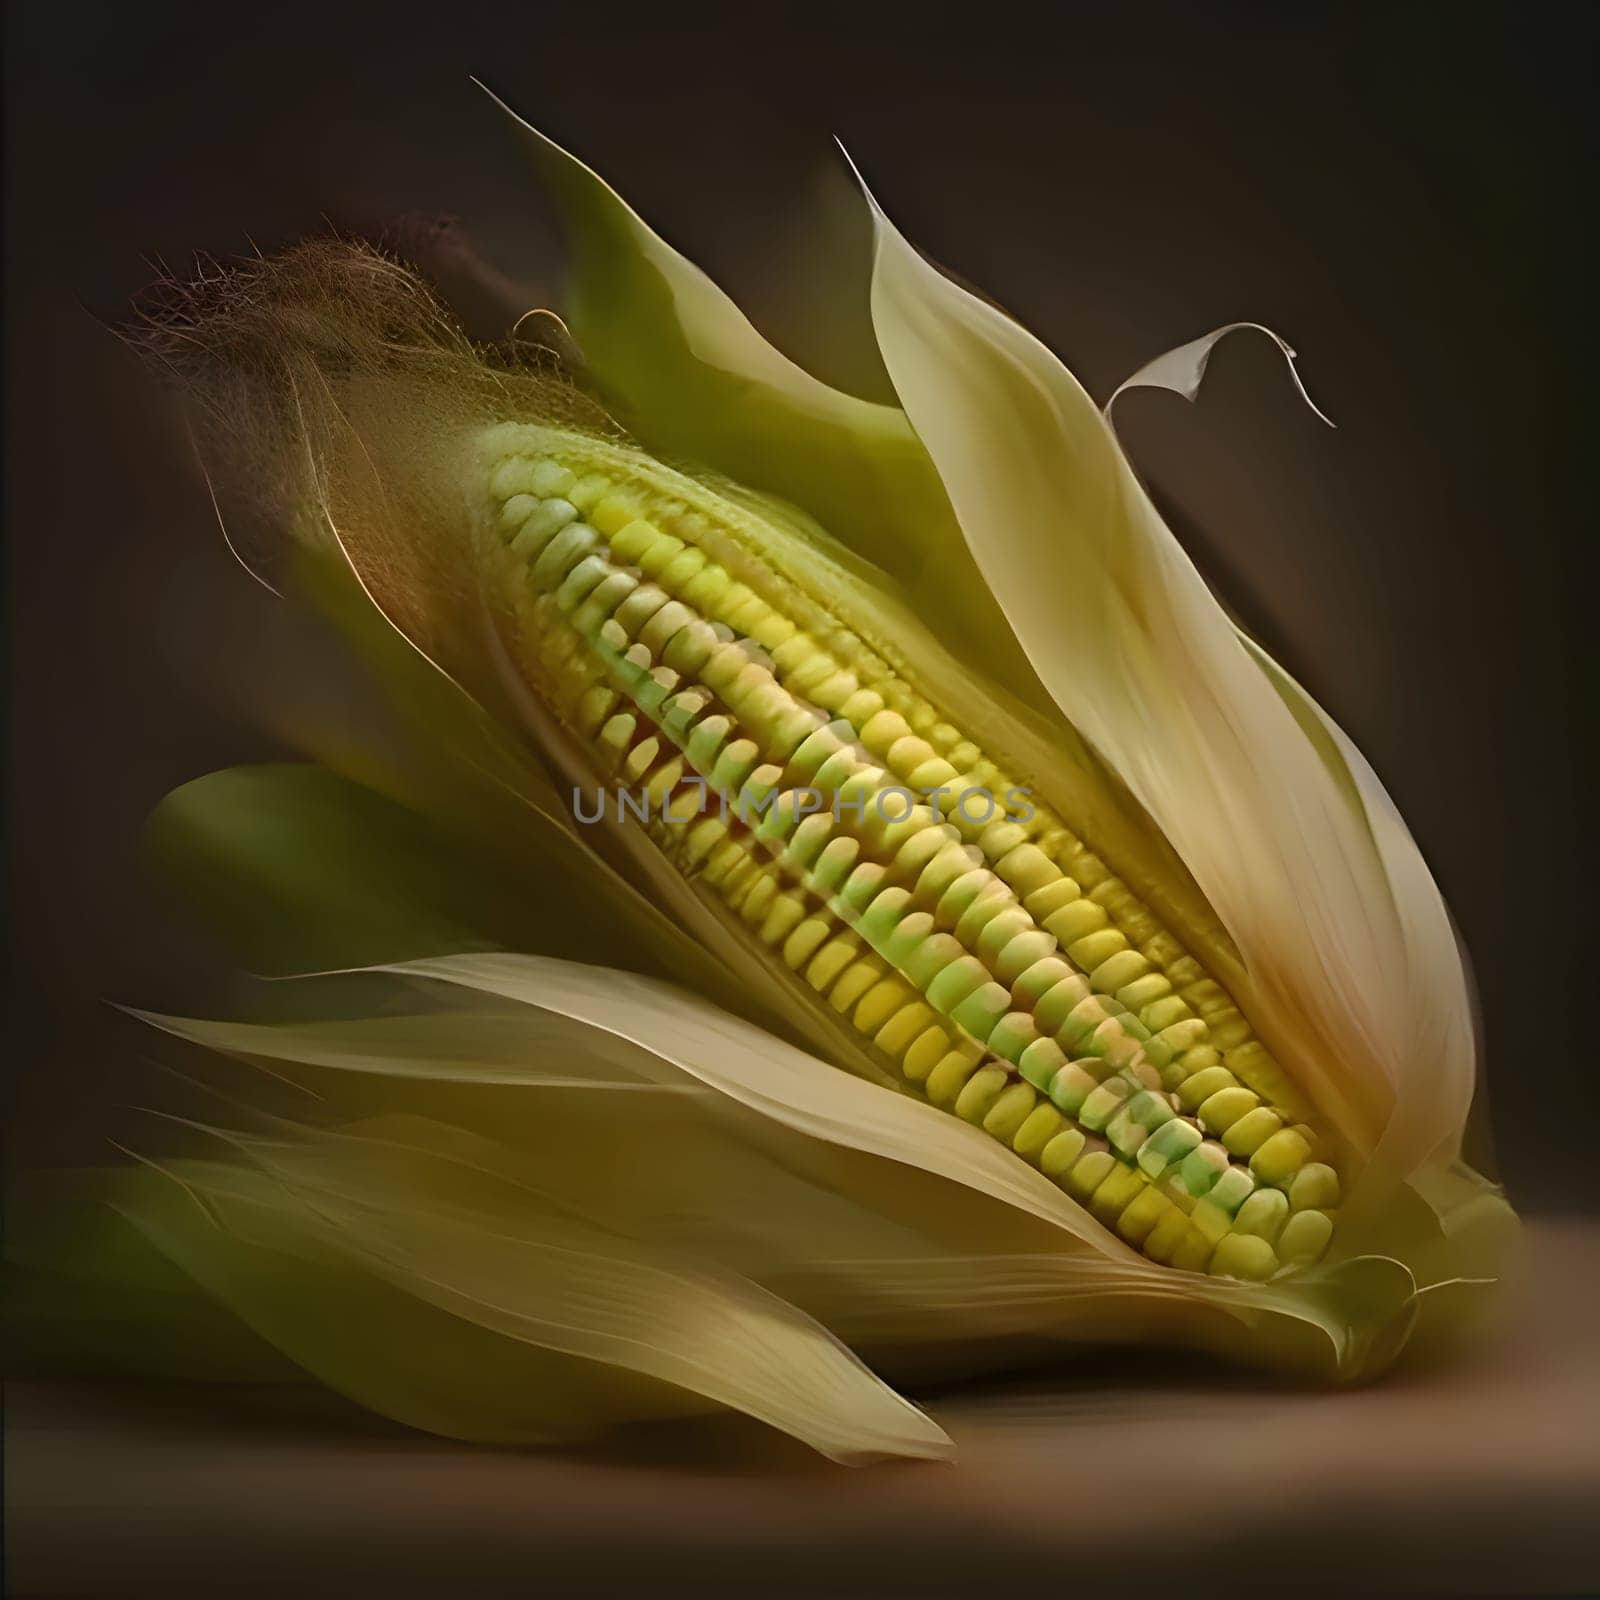 Yellow corn cob in Green leaves, dark background. Corn as a dish of thanksgiving for the harvest. An atmosphere of joy and celebration.